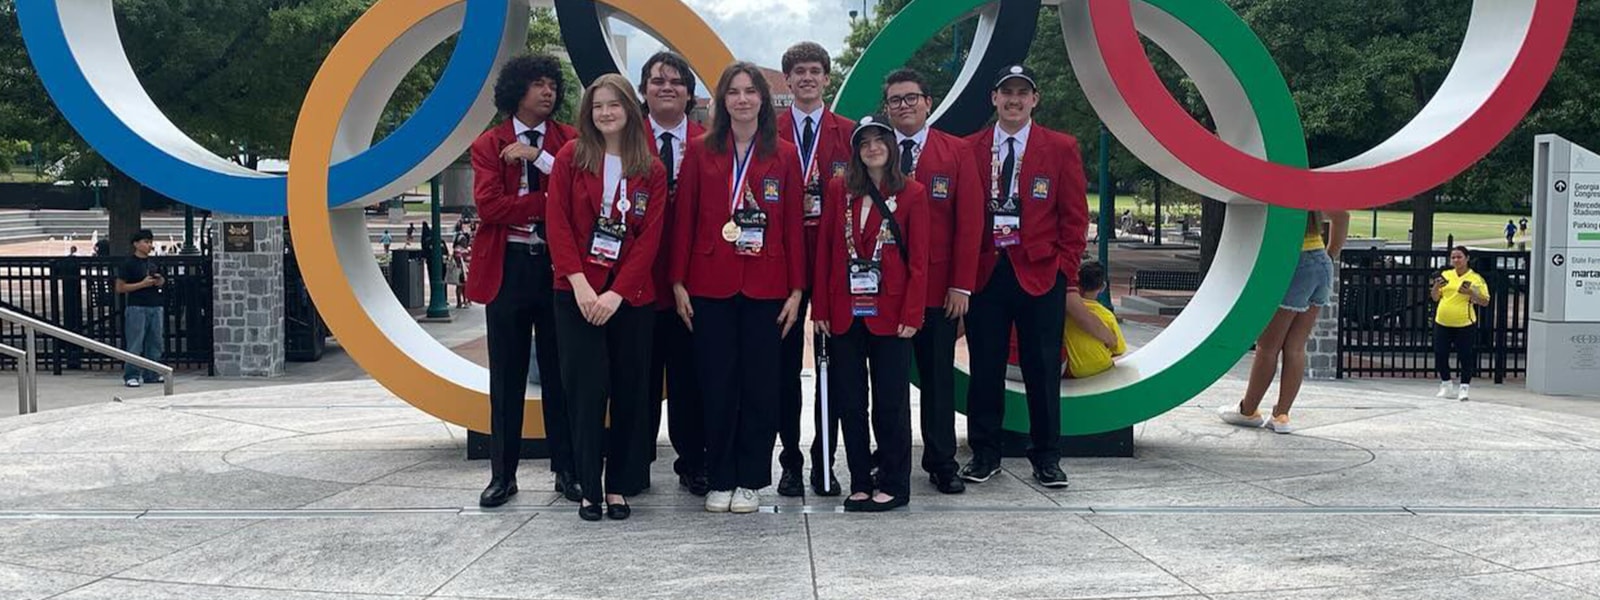 Students with SkillsUSA Medals